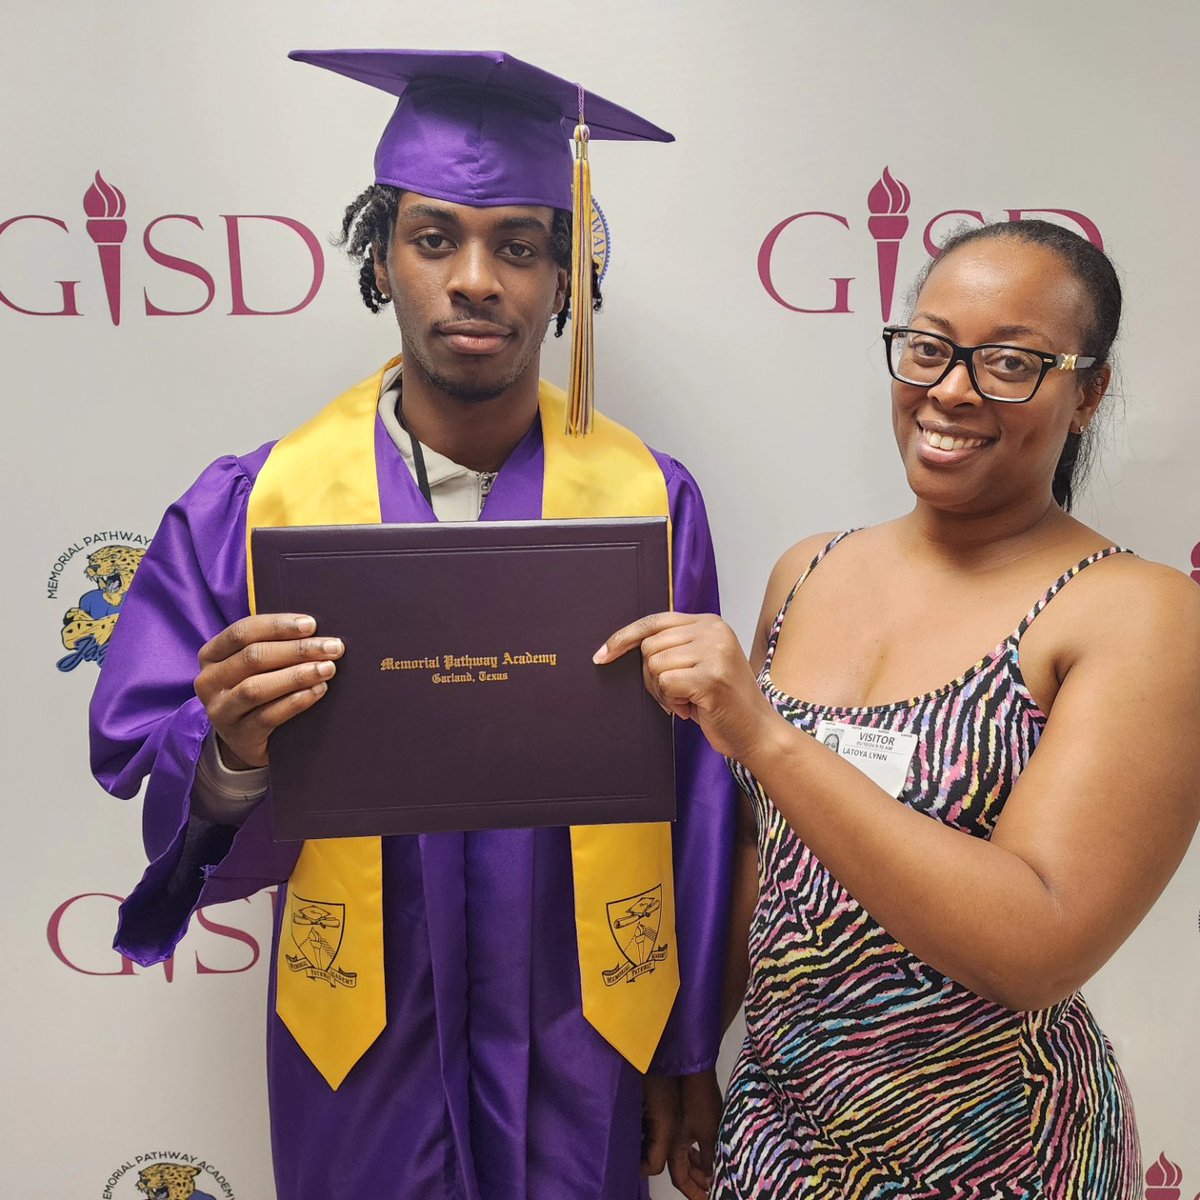 #MPAJAGS presents our proud graduate, Tyrone Hollins. We are so proud of you. Keep being a role model in your community, your family & at MPA #LIVEYOURDREAMS #GRADUATE